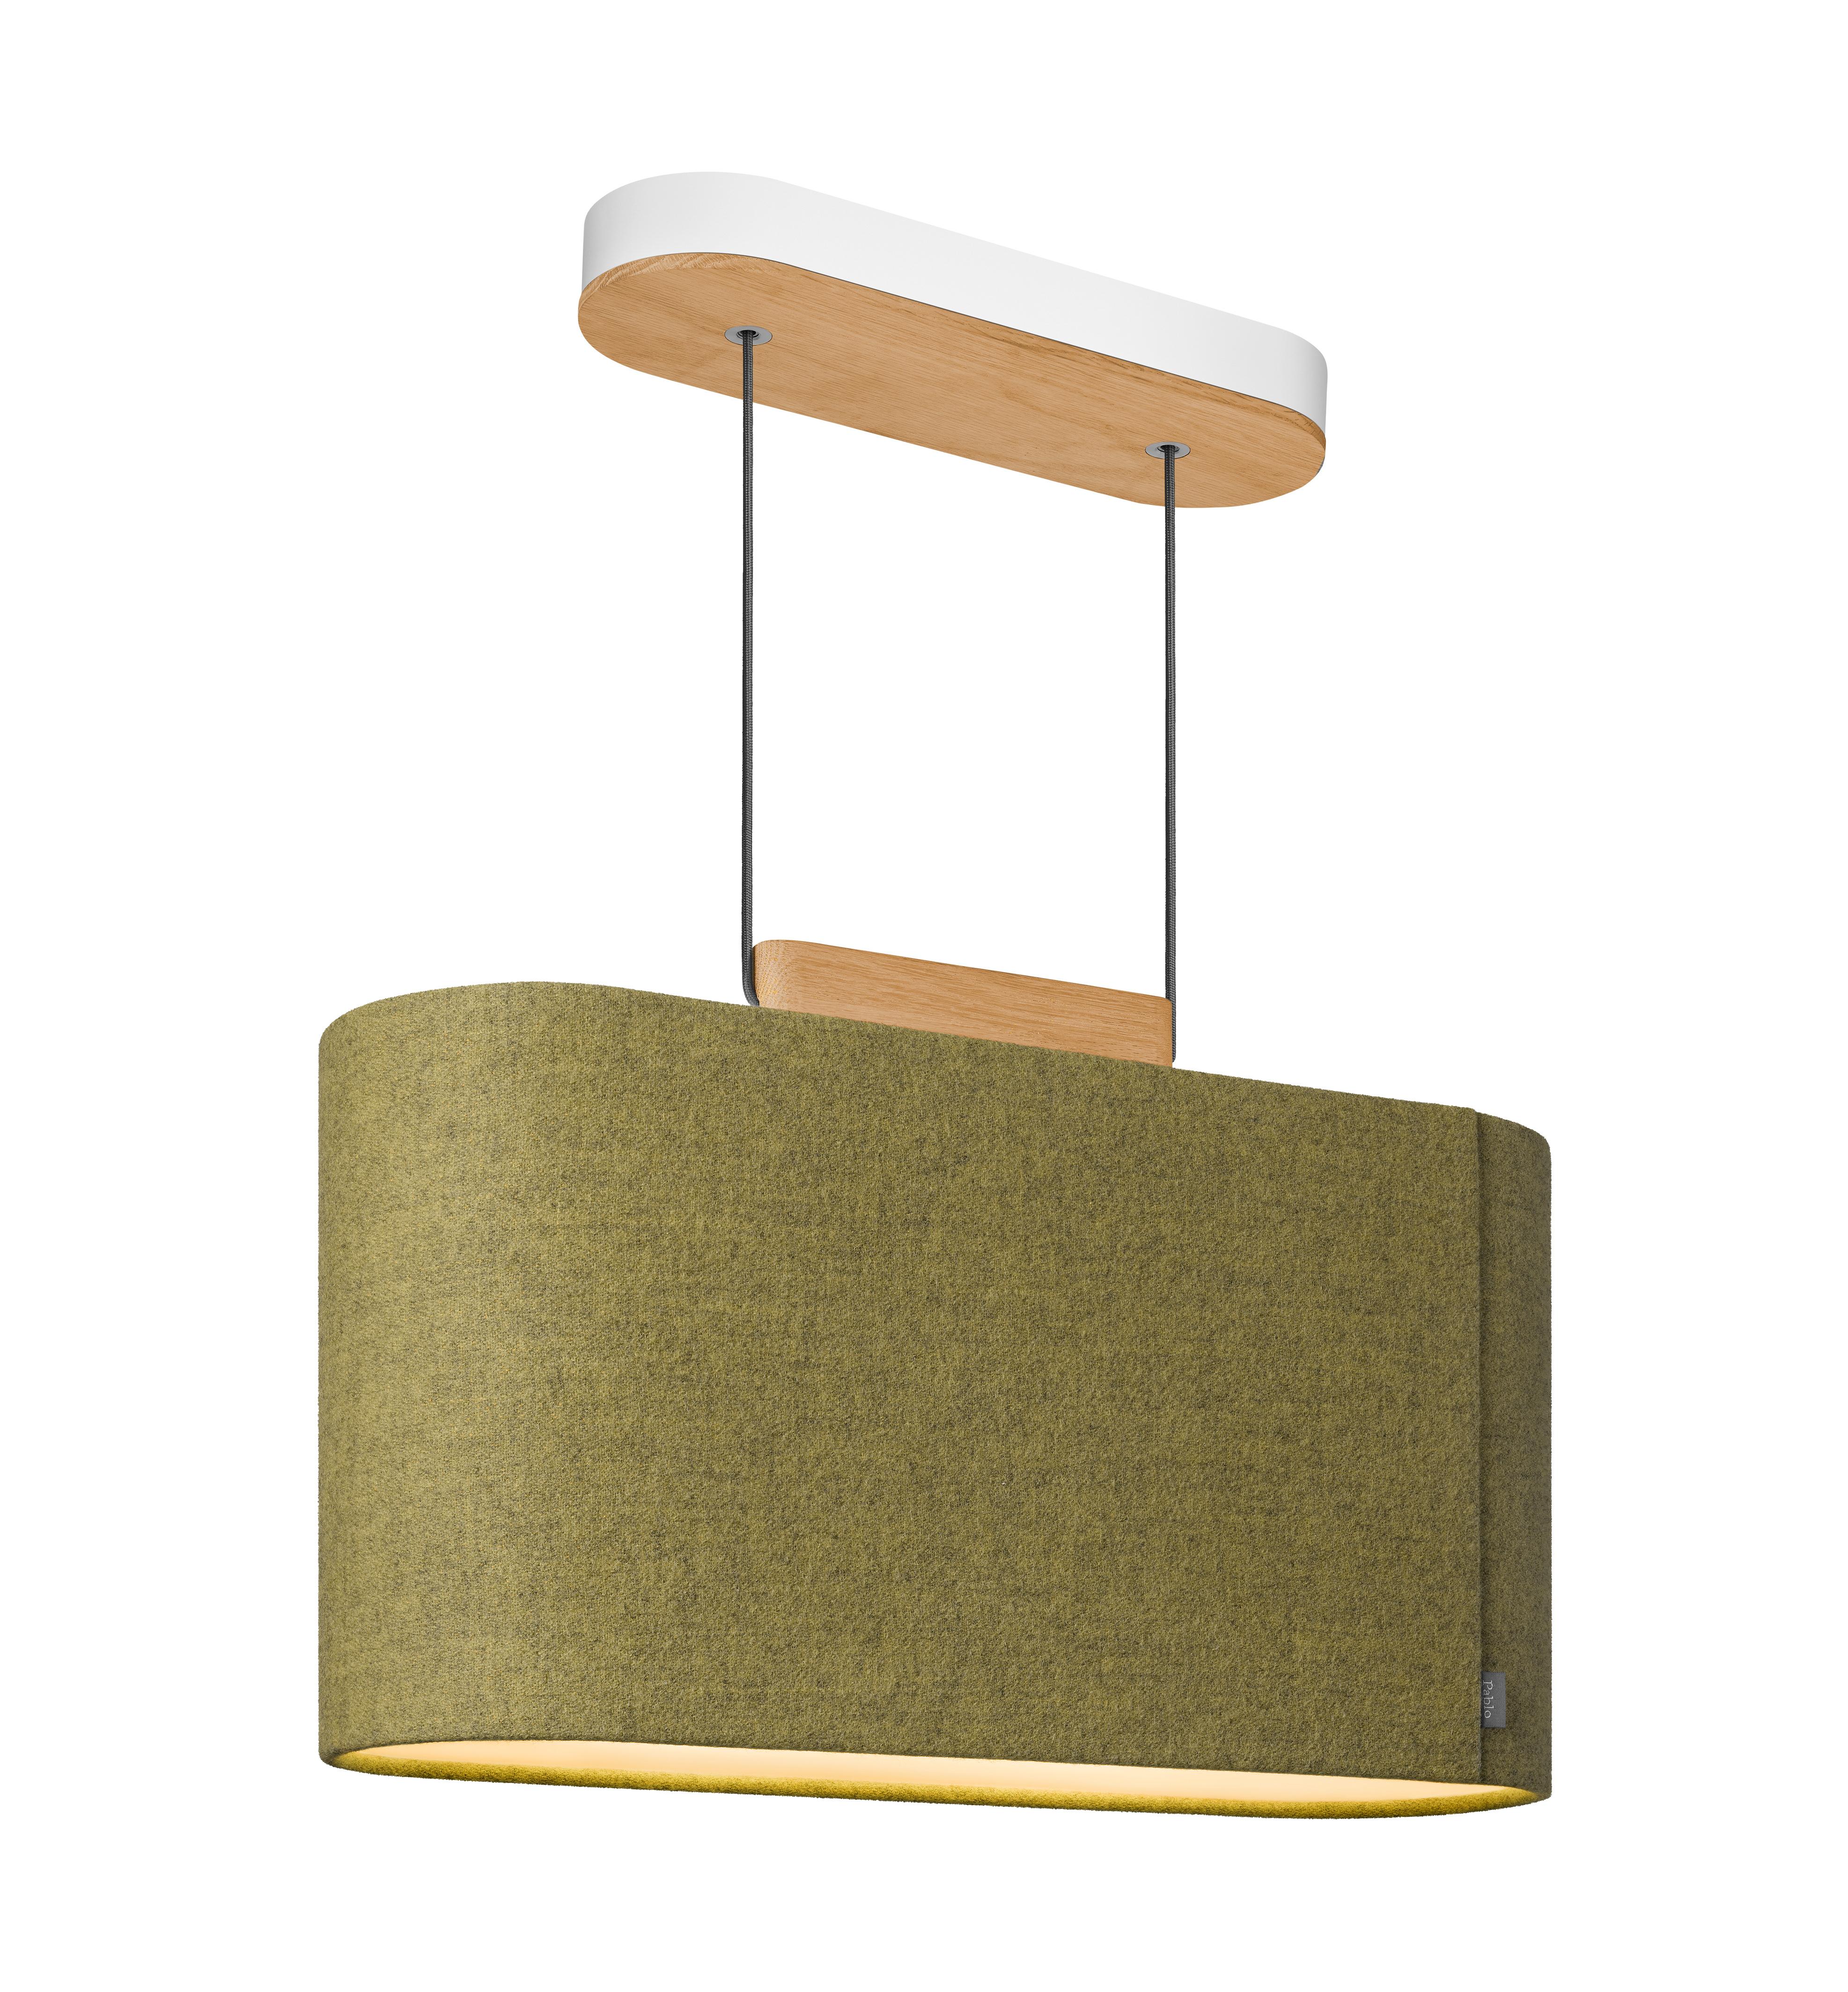 The Belmont Collection was a collaborative creation with designer Brad Ascalon re-envisioning the traditional fabric shade lamp but with the warmth and preciousness of hand crafted furniture. Belmont’s iconic, yet reductive form creates a natural